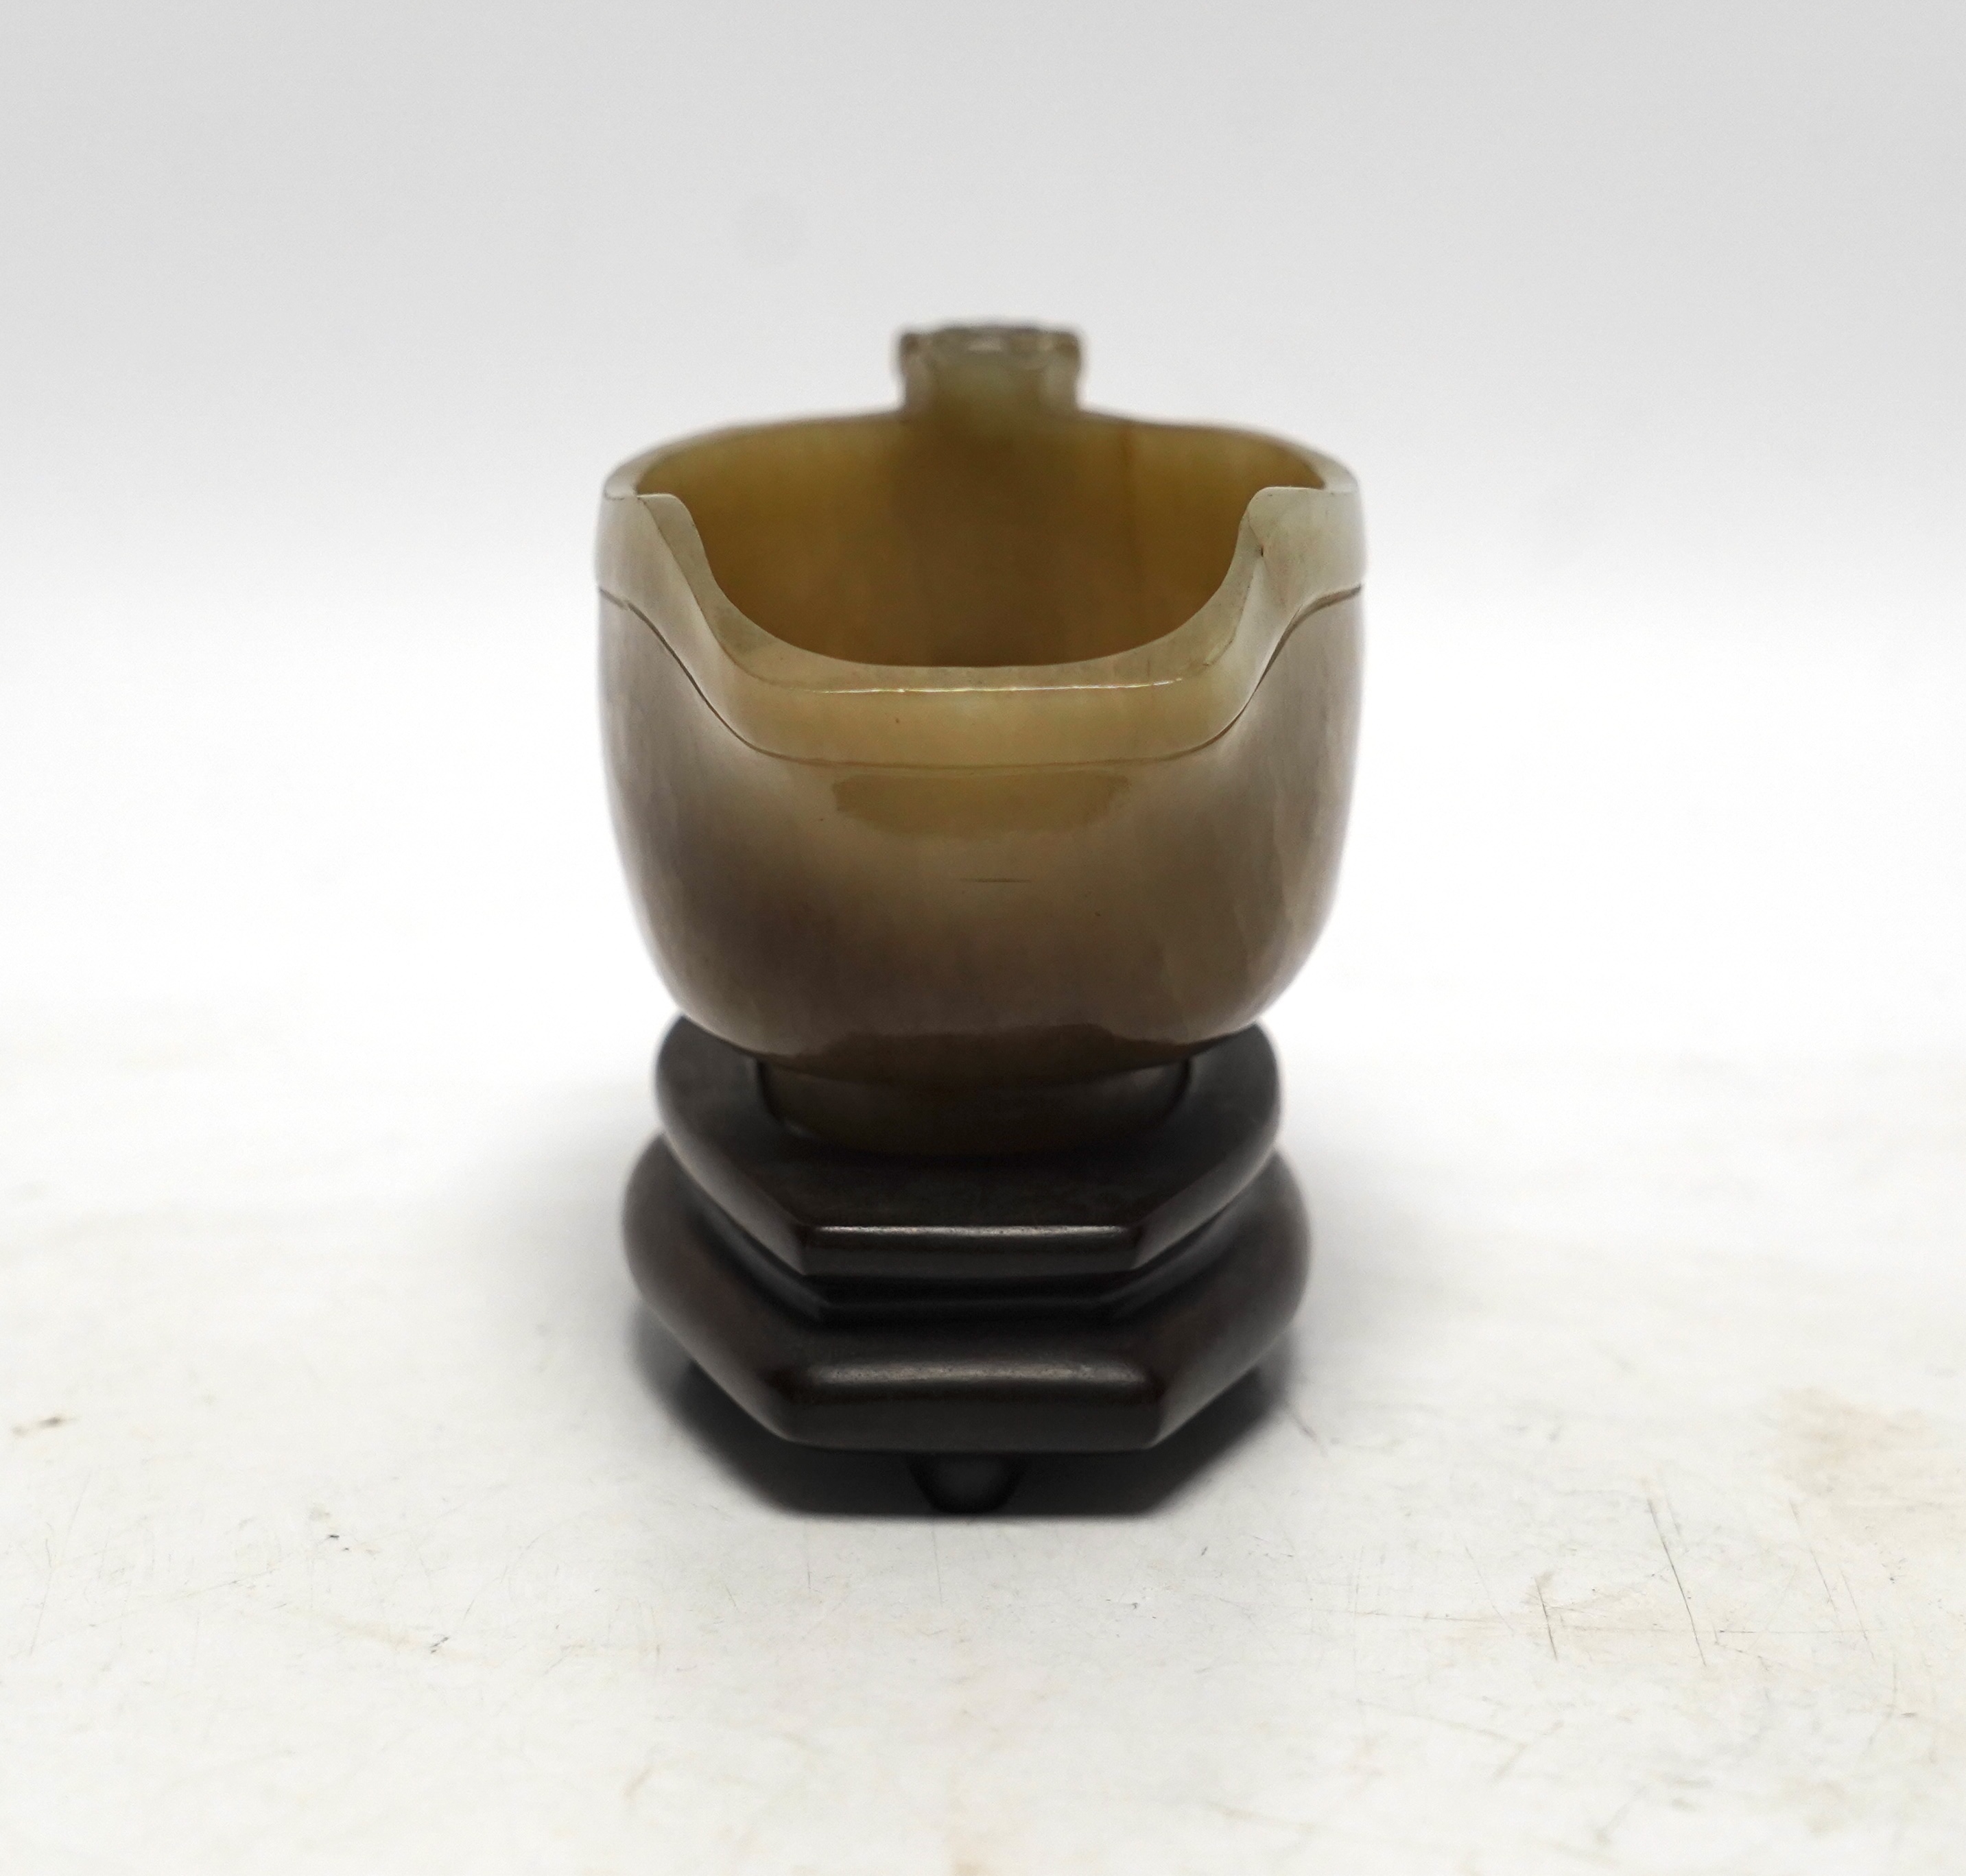 An 18th century Chinese archaistic jade pouring vessel, yi, with carved dragon handle, 6cm high, on a hardwood stand